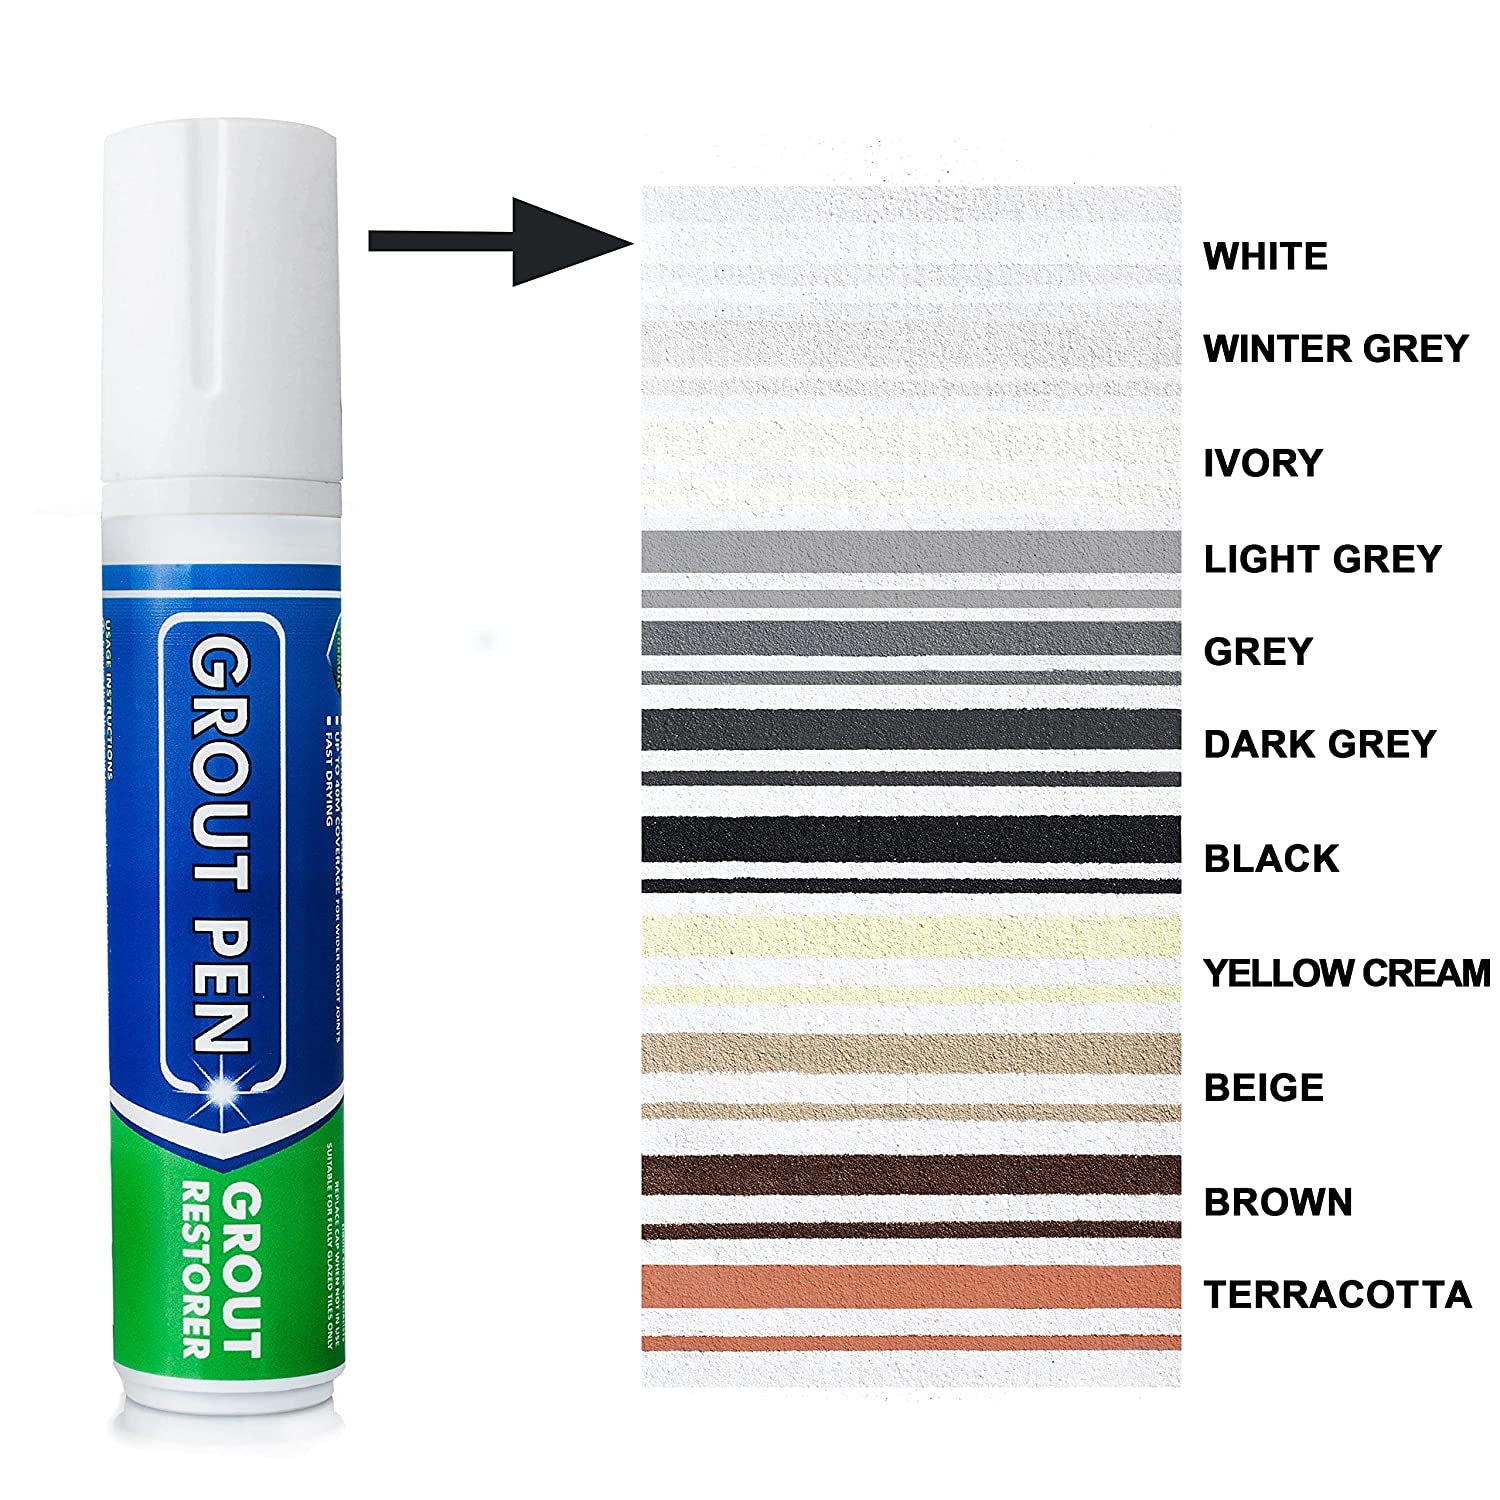 RAINBOW CHALK MARKERS LTD, Grout Pen Large White - Ideal to Restore the Look of Tile Grout Lines